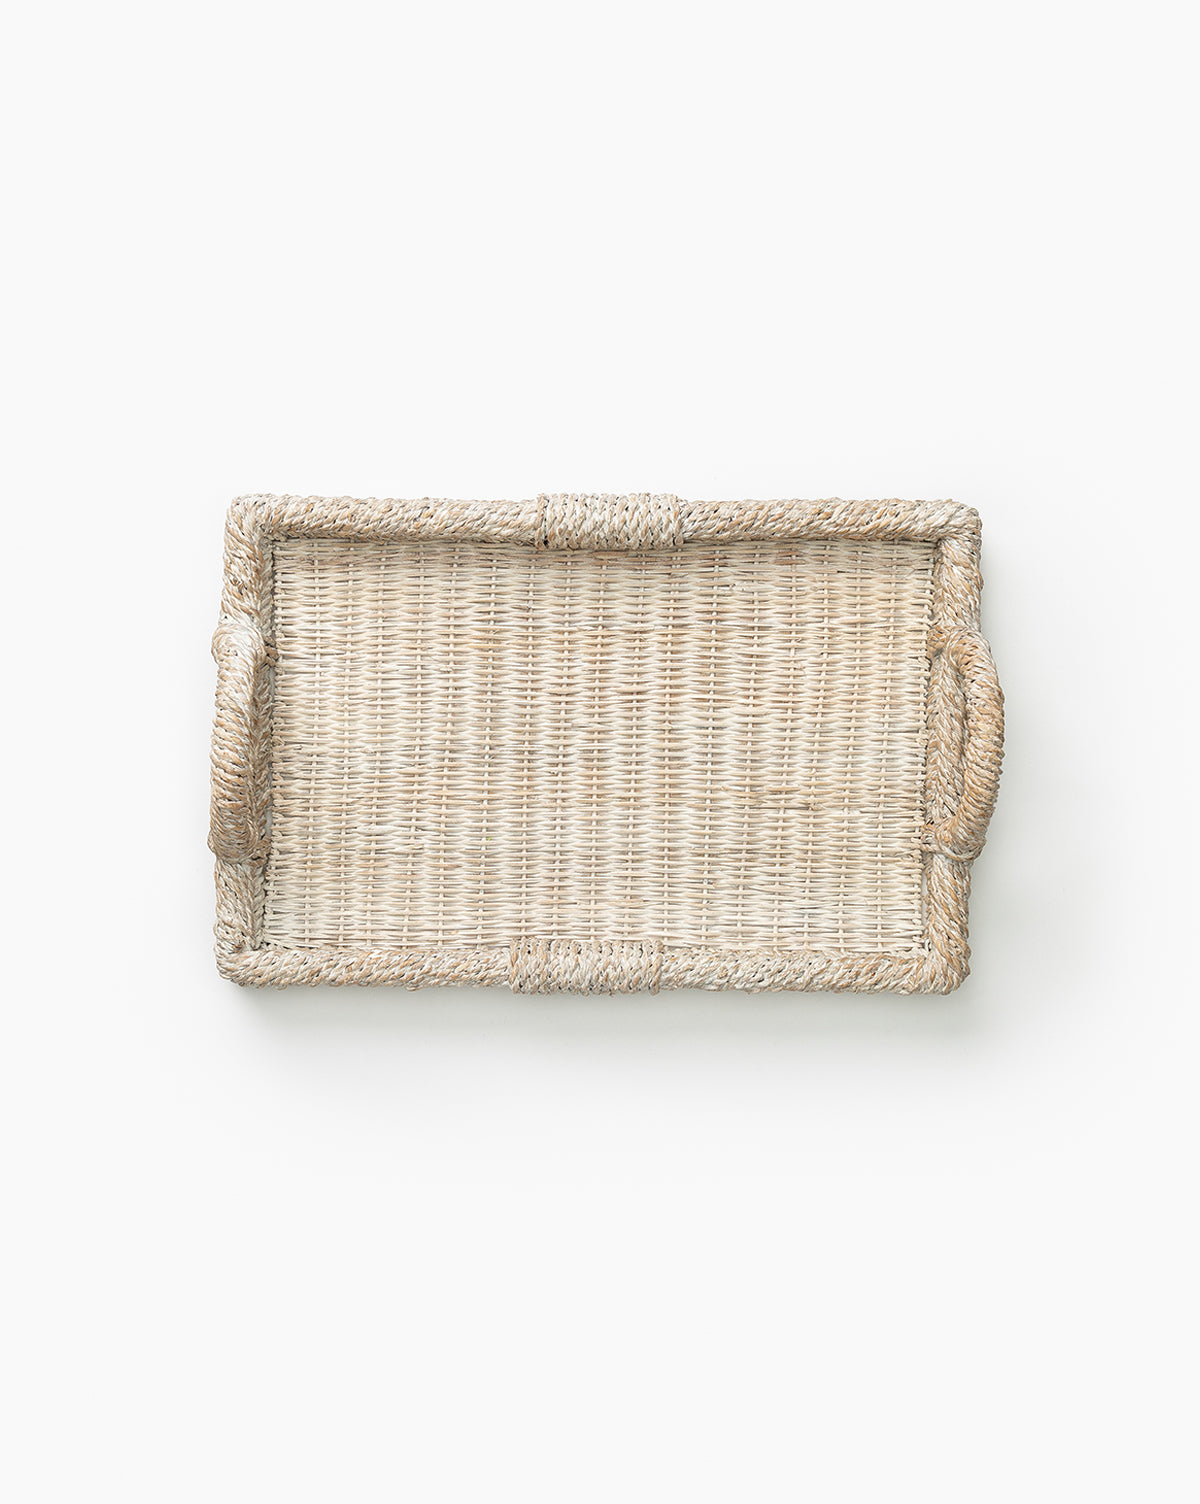 Creative Co-op, Whitewashed Handled Tray